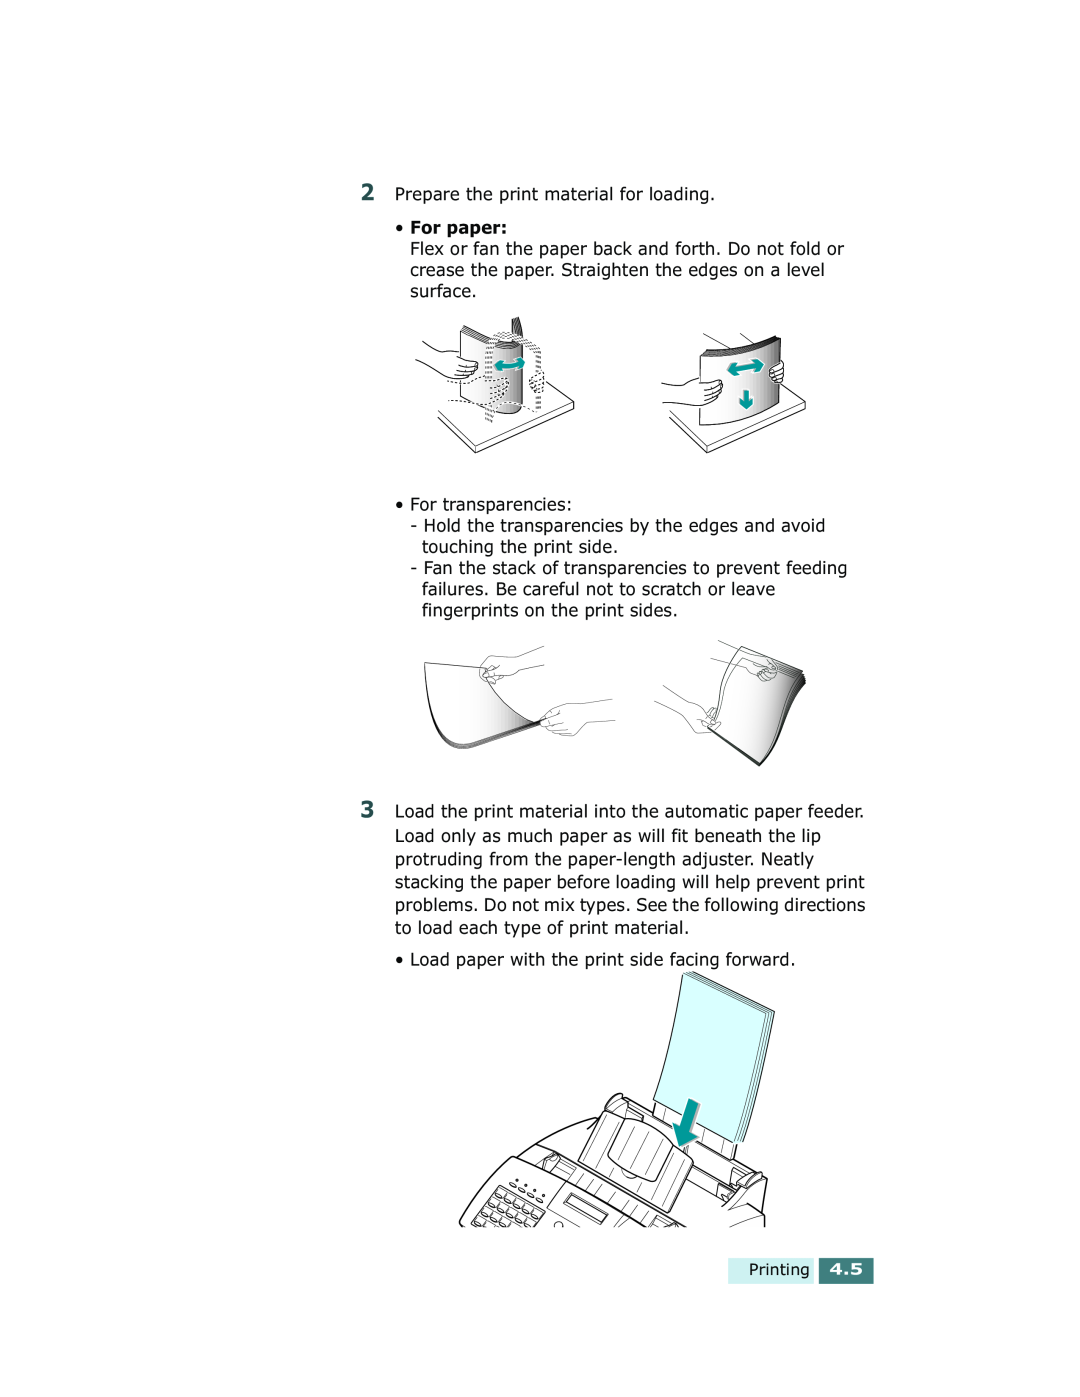 Xerox Pro 580 manual For paper 